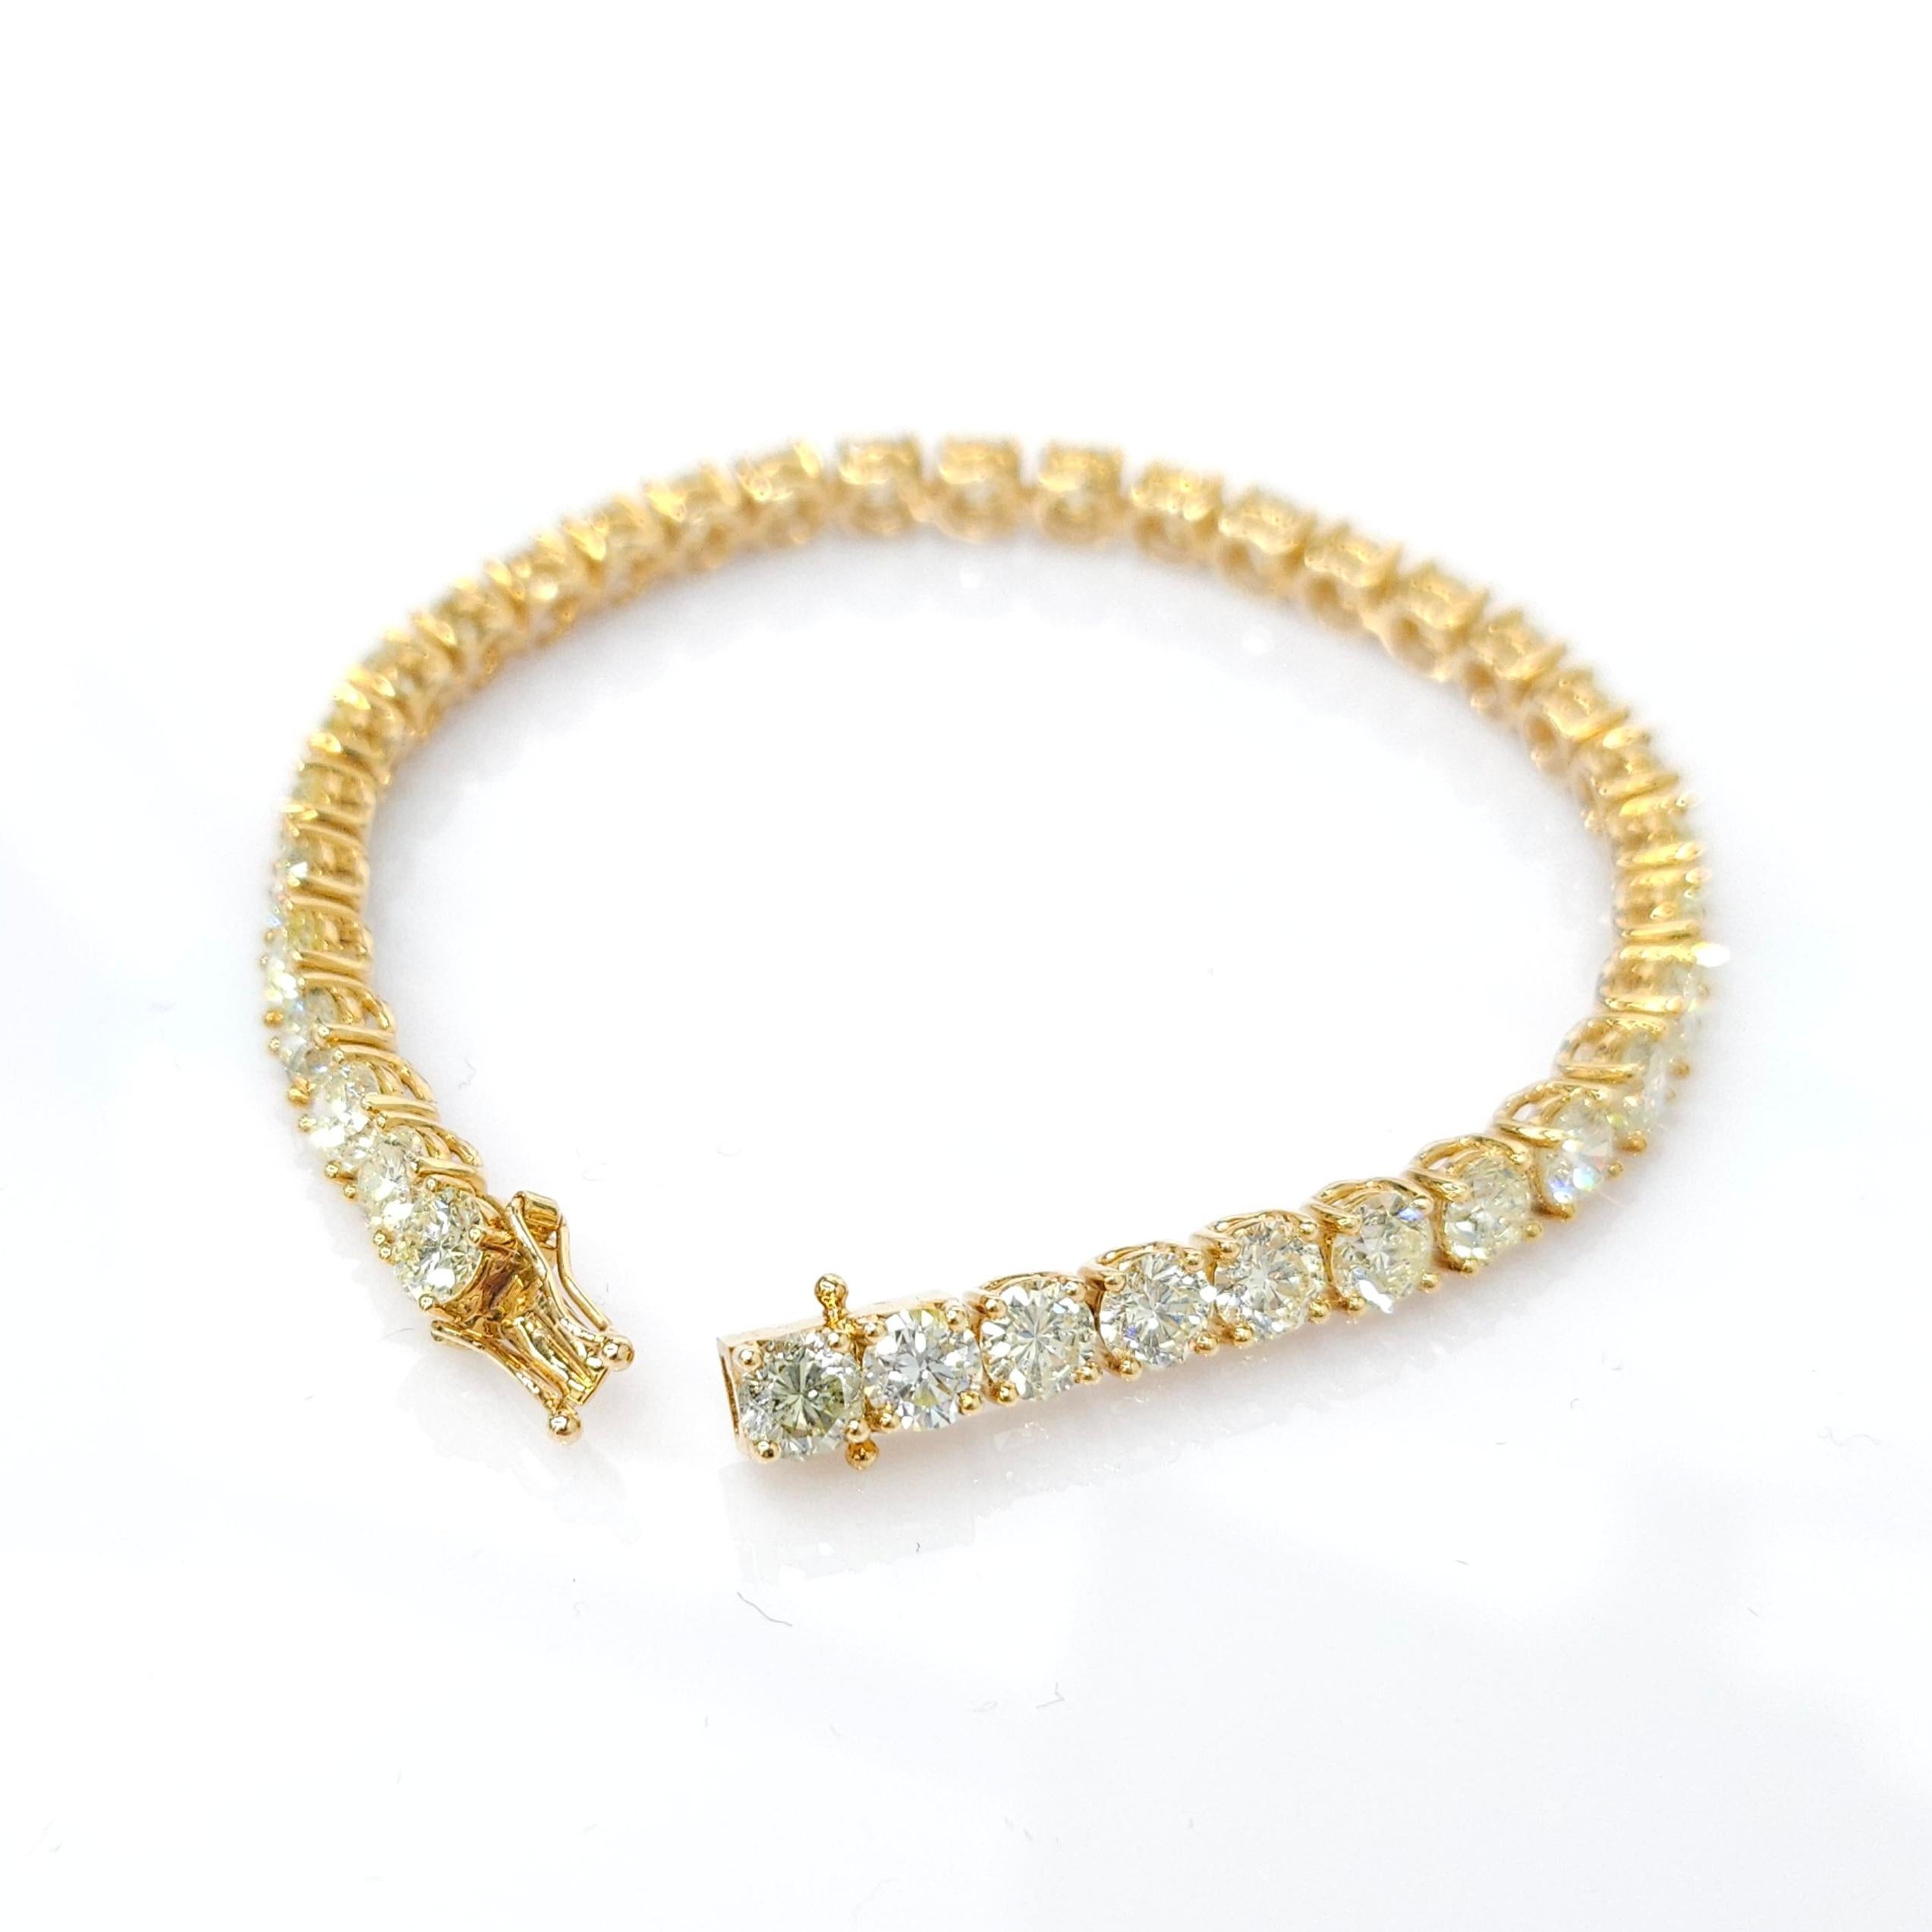 Adorn your wrist with the timeless elegance and shimmering beauty of this exquisite 11.65 Carat Total Round Diamond Tennis Bracelet in 18K Yellow Gold. Crafted to perfection, this bracelet is a true statement piece that exudes luxury and